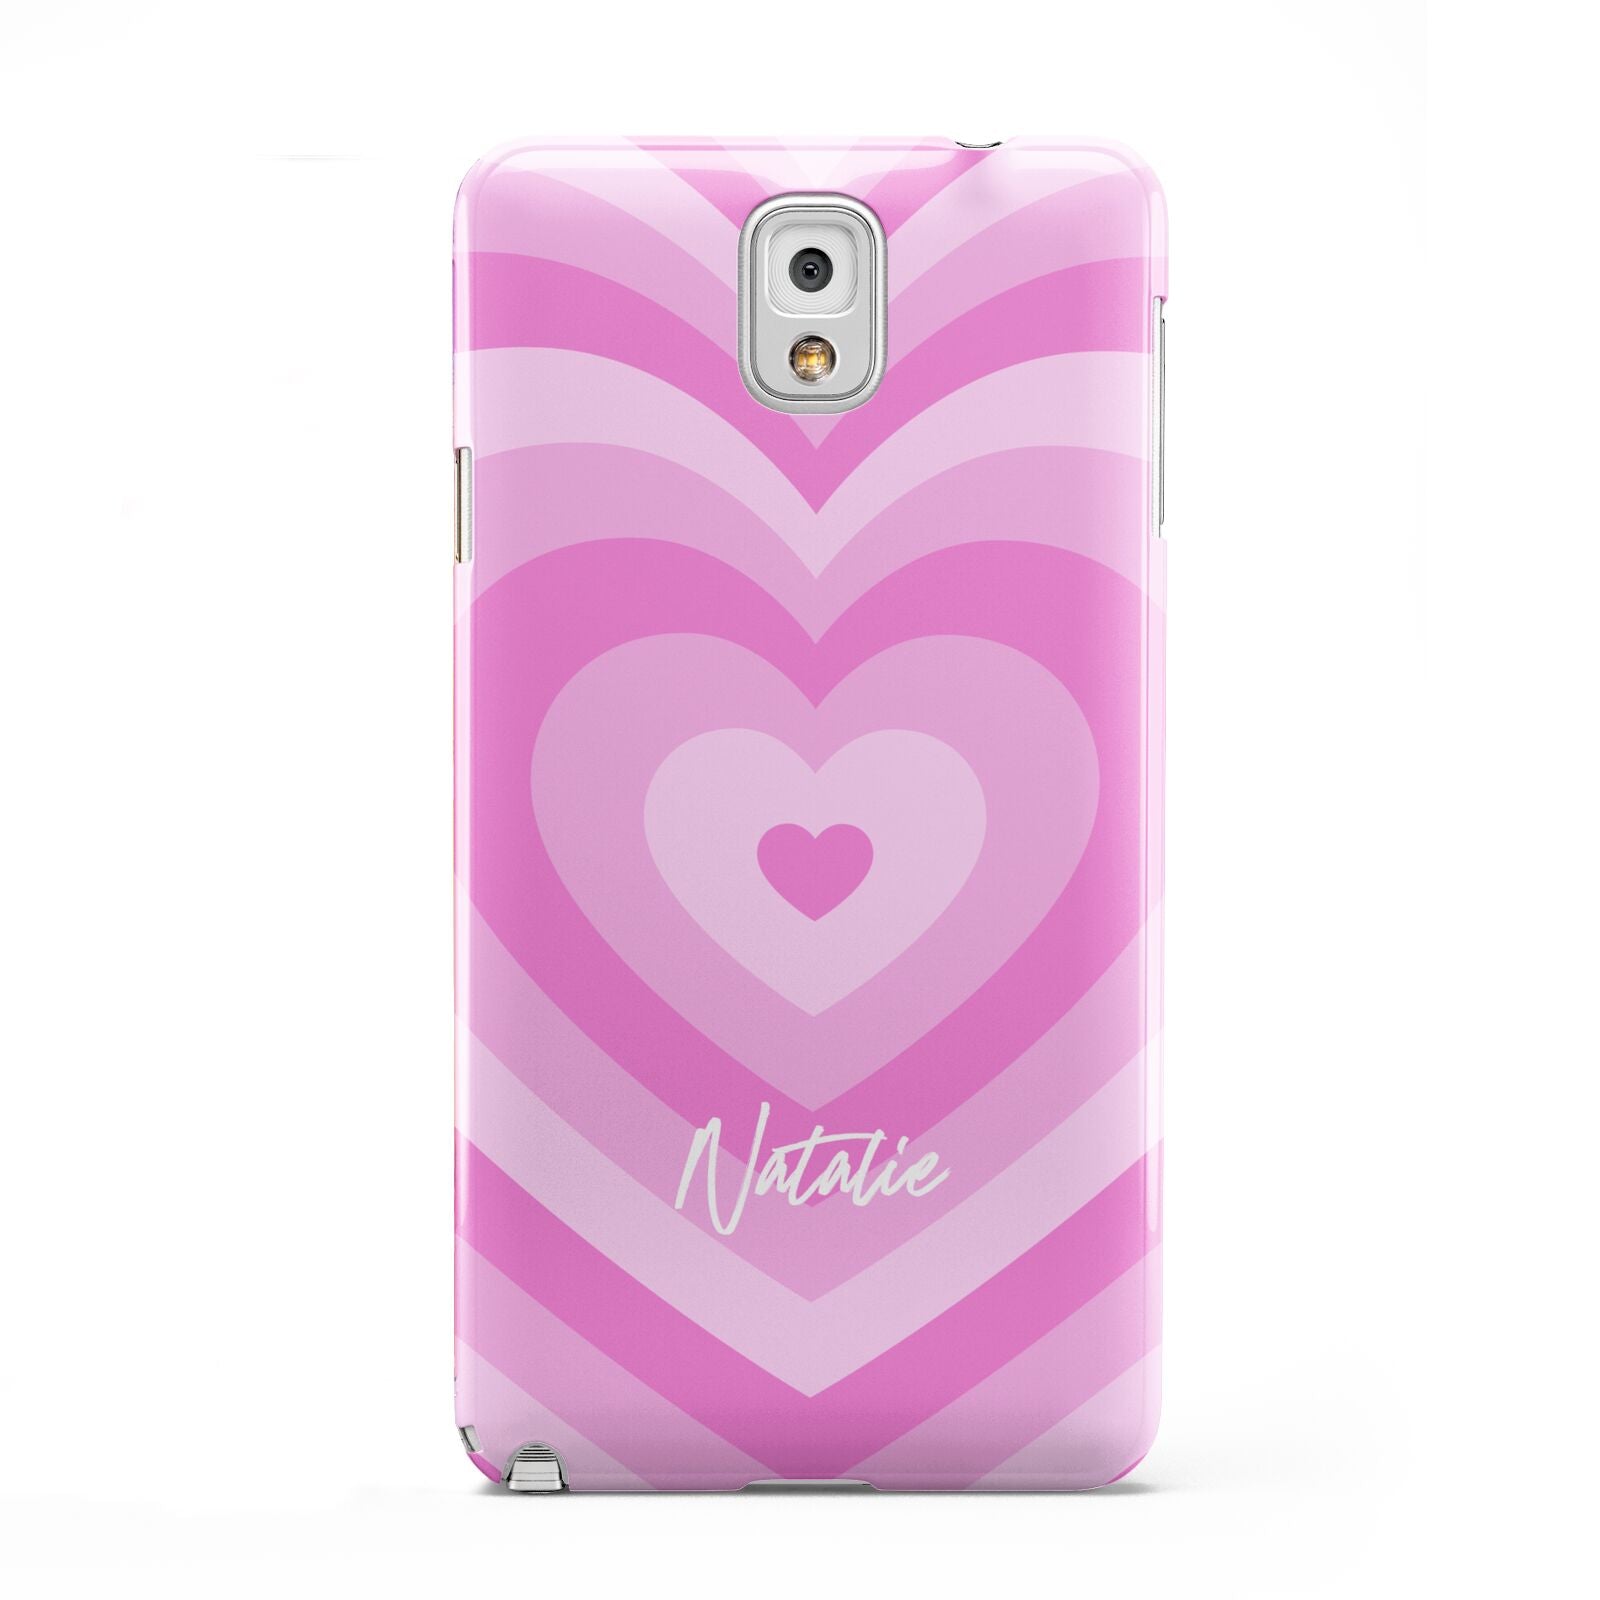 Personalised Pink Heart Samsung Galaxy Note 3 Case